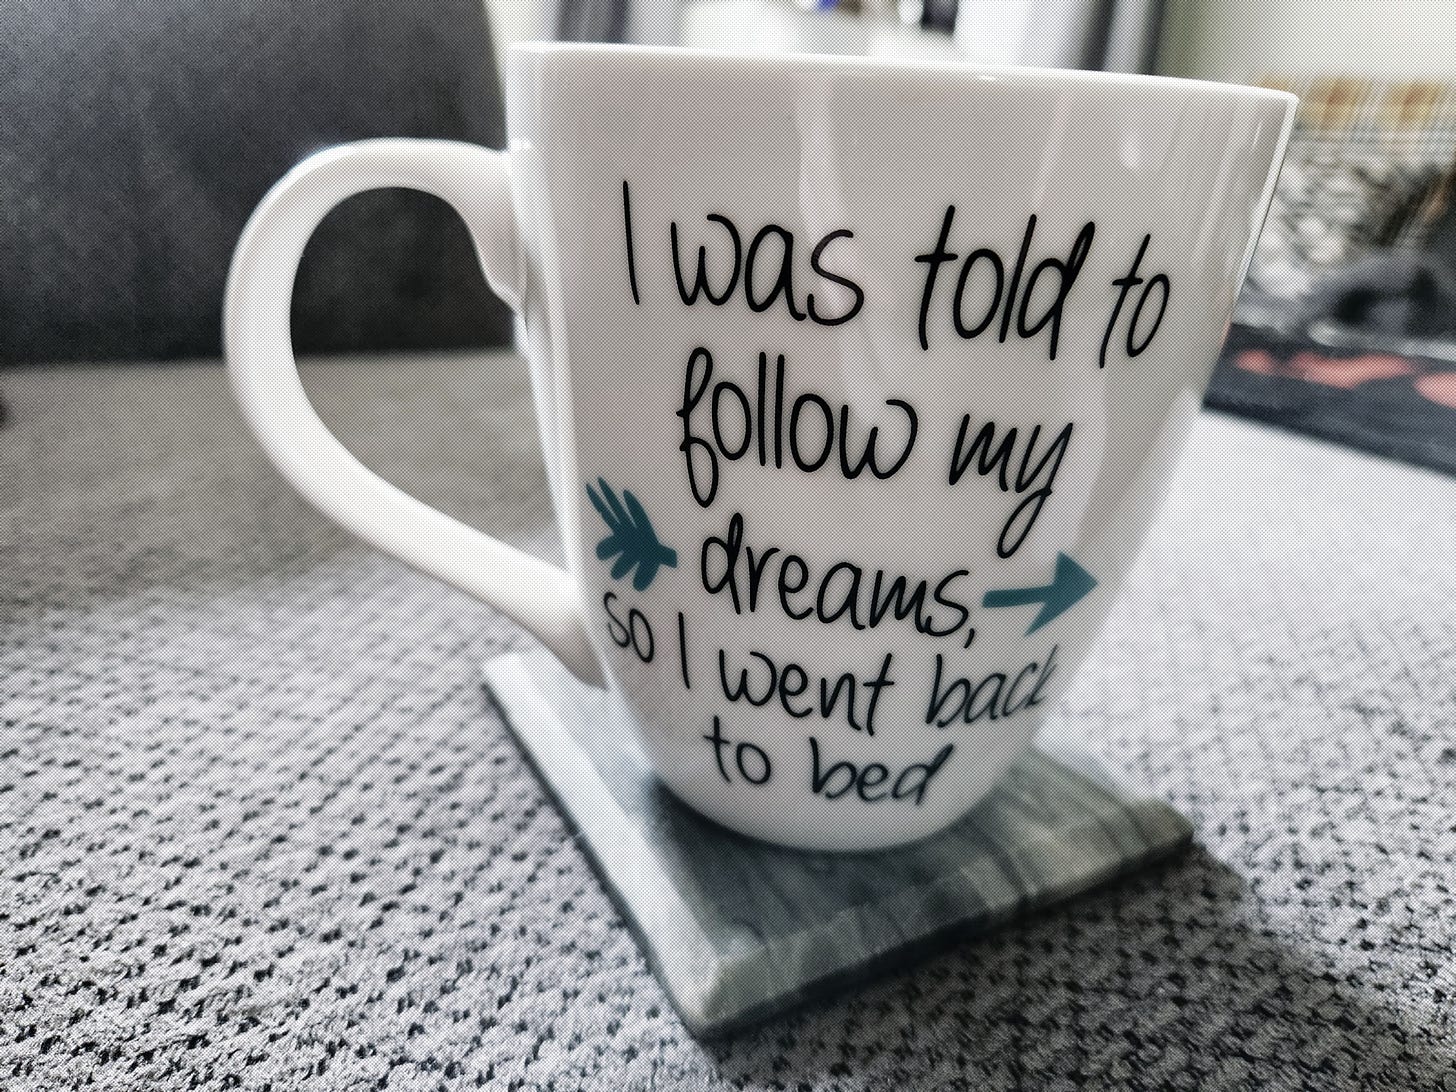 Coffee mug saying "I was told to follow my dreams, so I went back to bed"